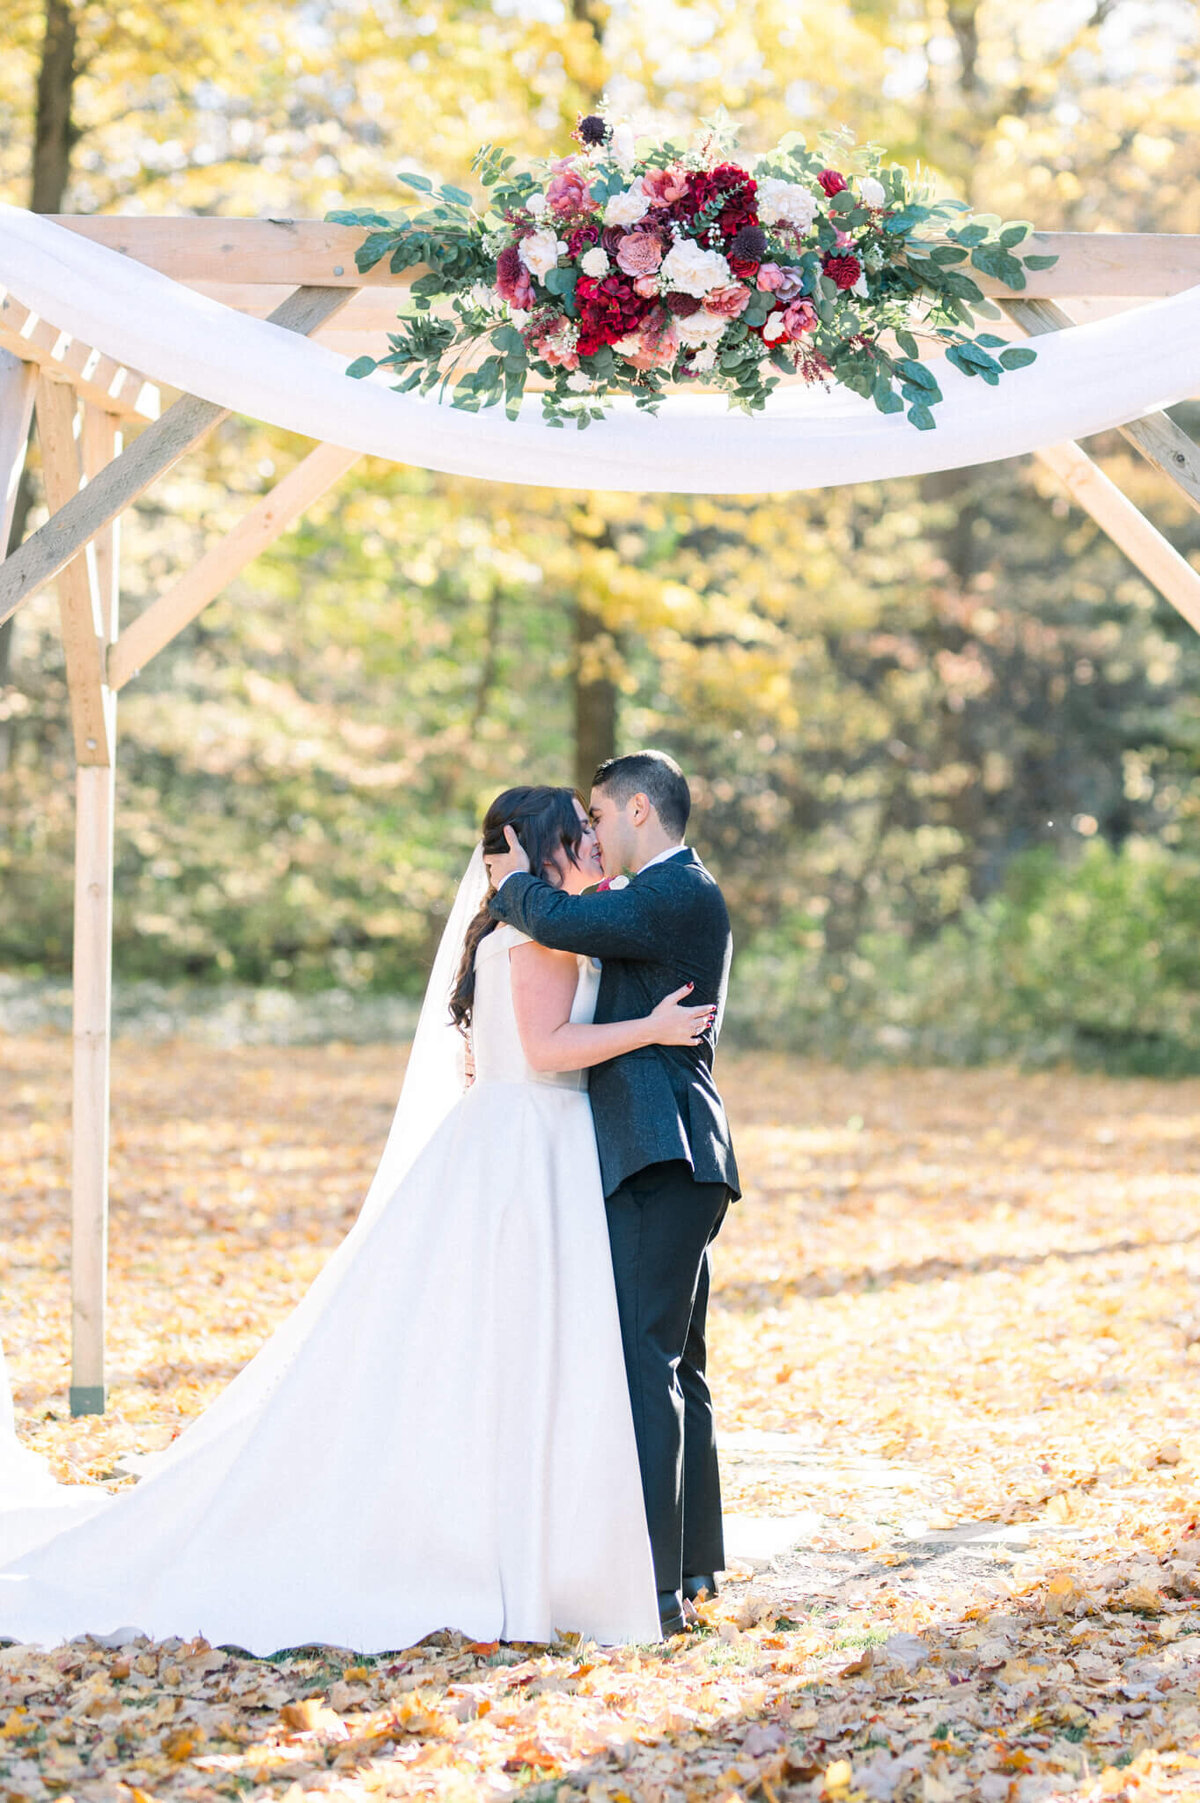 Bride and groom share a first kiss under the outdoor wedding pergola